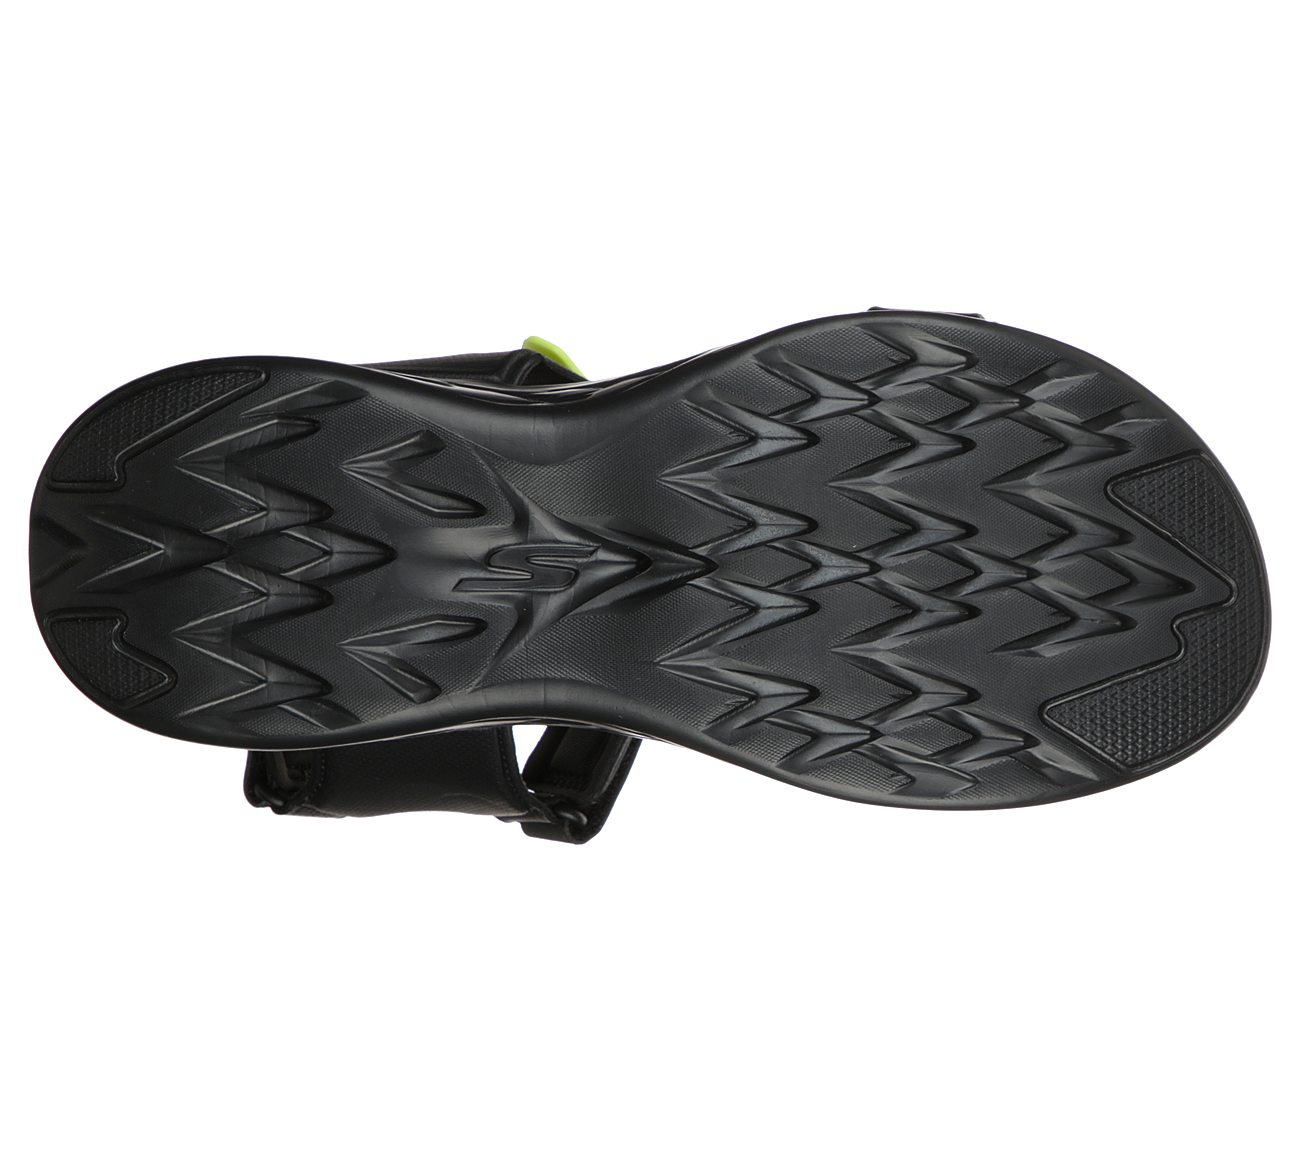 ON-THE-GO 600 - VENTURE, BLACK/LIME Footwear Bottom View